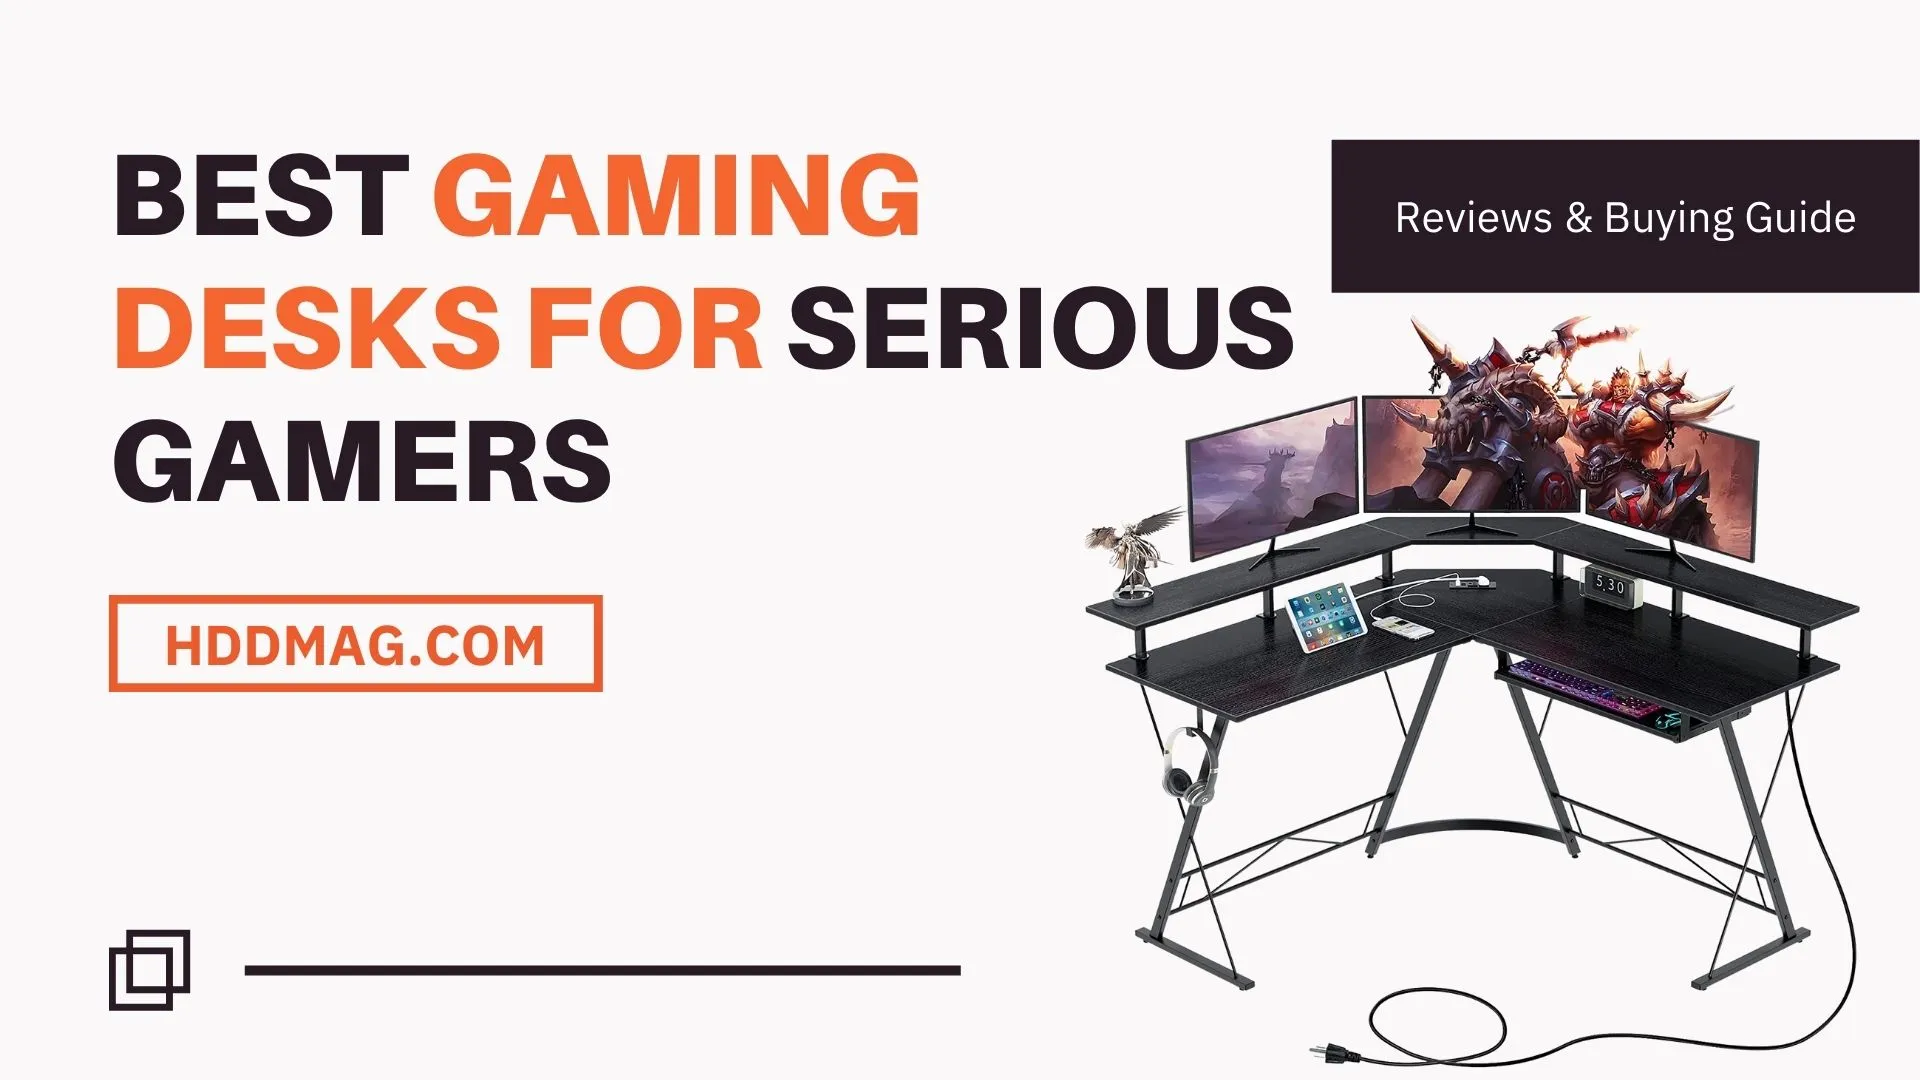 Best Gaming Desks for Serious Gamers